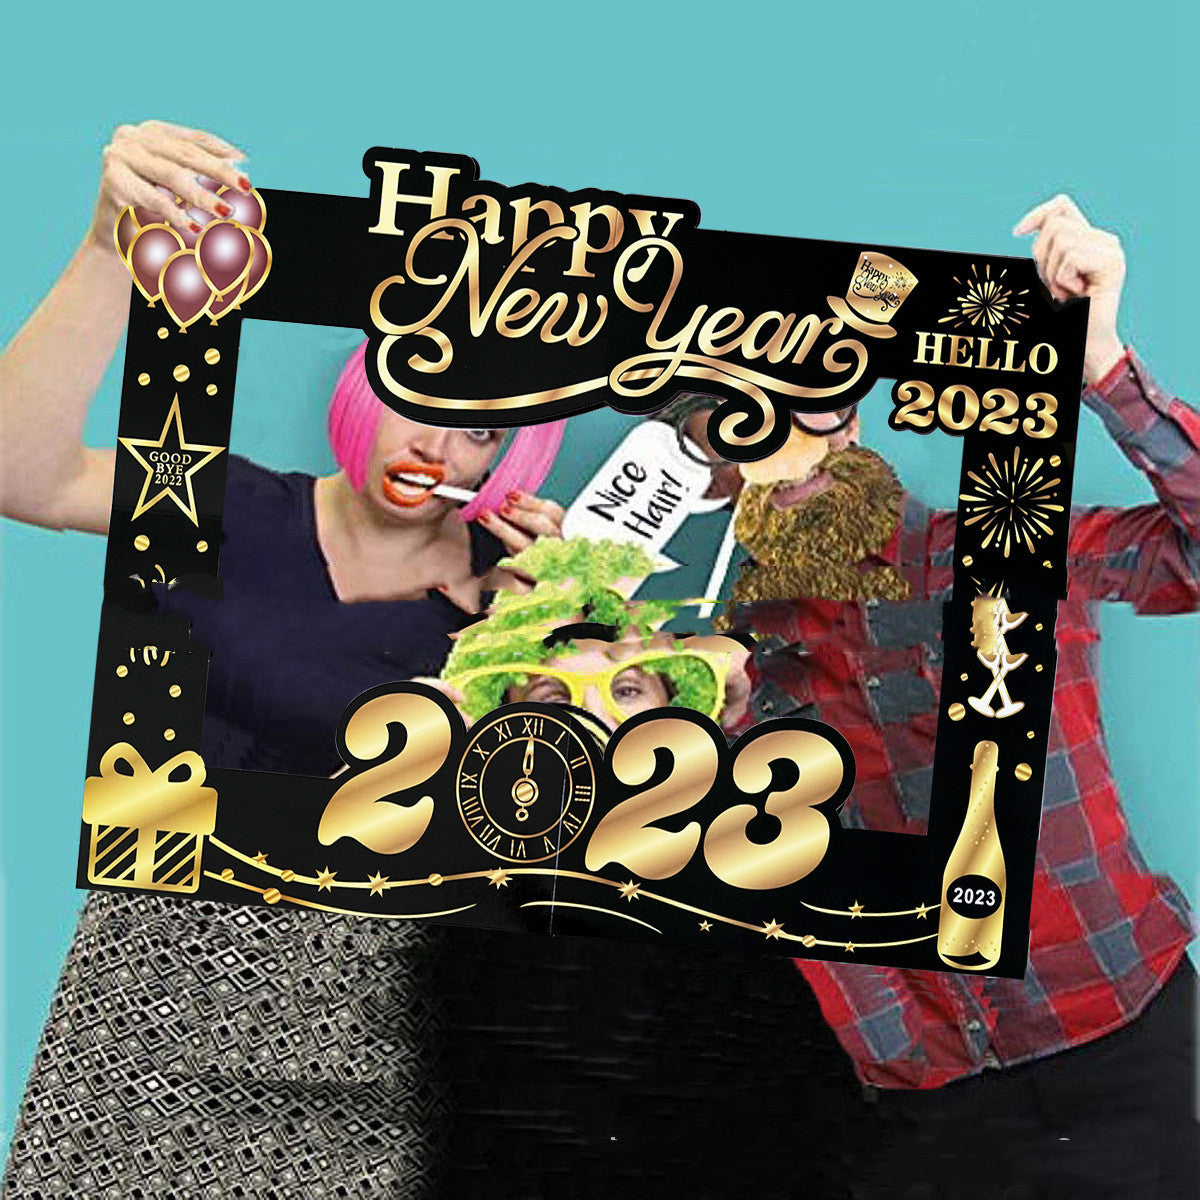 New Year Party Glasses Paper Props